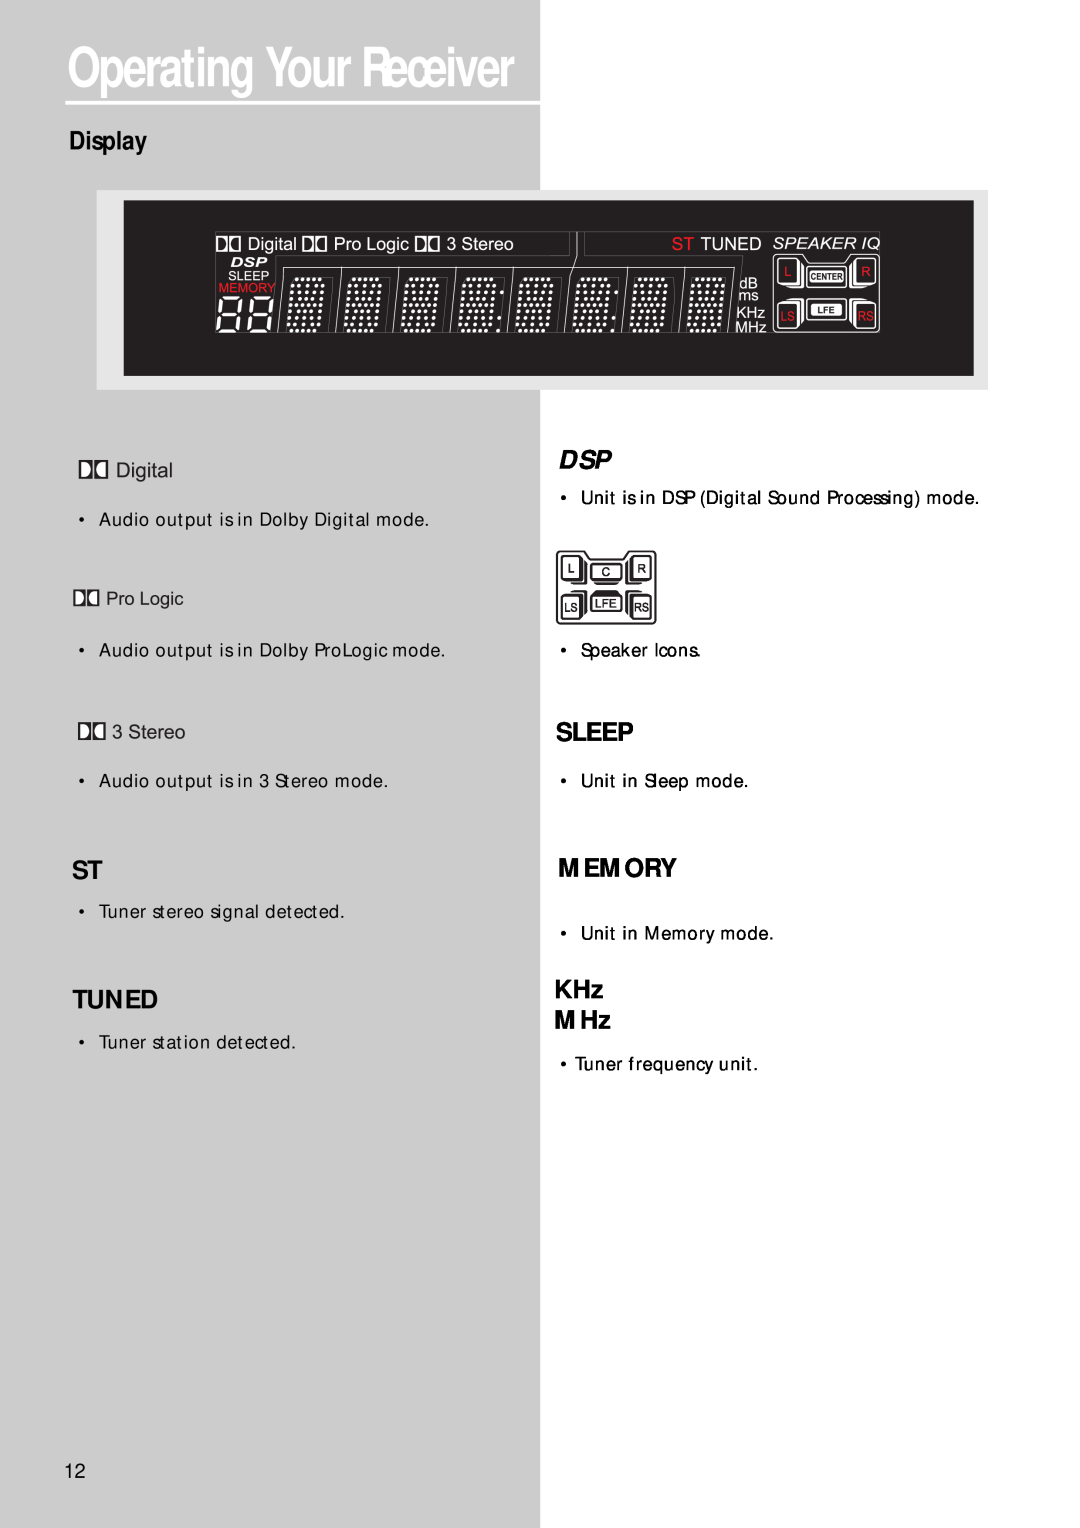 RCA RT2250R, RT2280 user manual Display, Tuned, Sleep, Memory, KHz MHz, Operating Your Receiver 